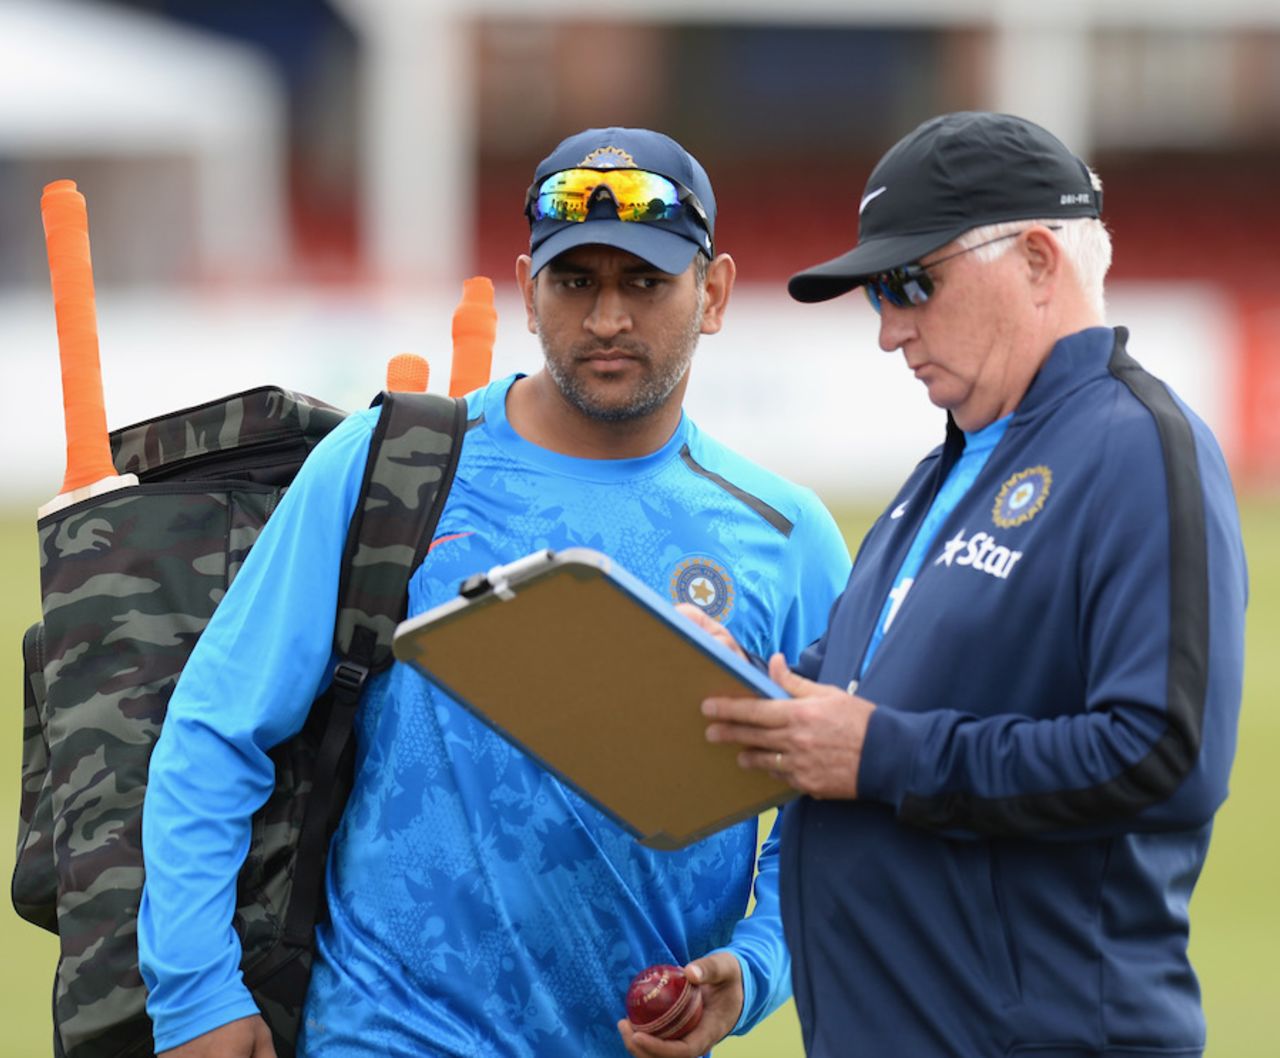 Duncan Fletcher shares notes with MS Dhoni after India's training session, Leicester, June 25, 2014 